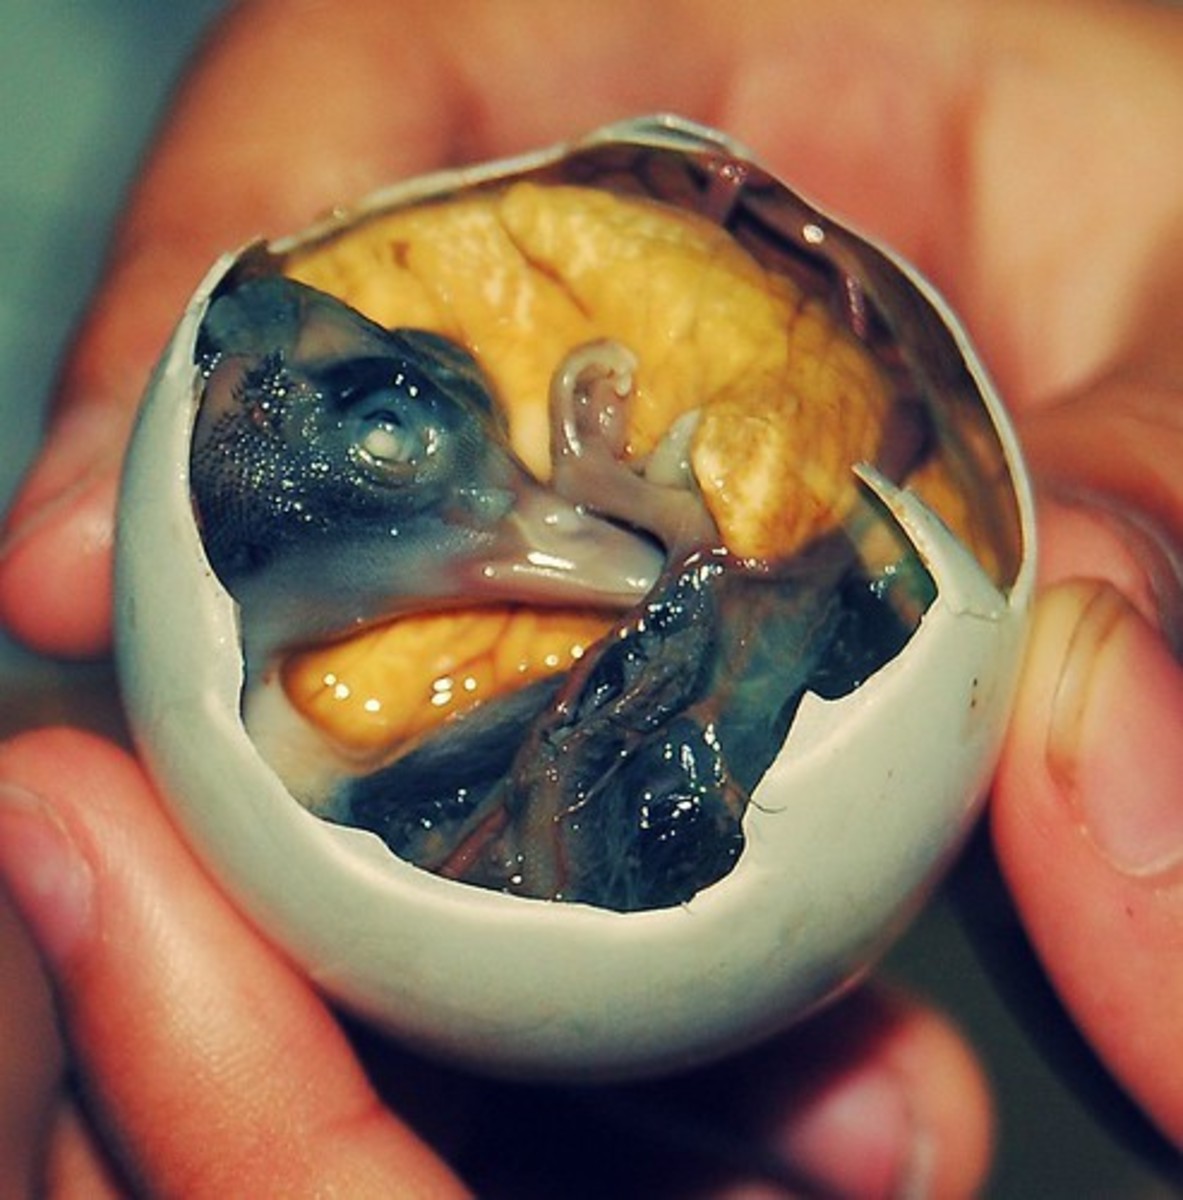 Balut, or developing duck embryo, is a popular food in parts of Southeast Asia